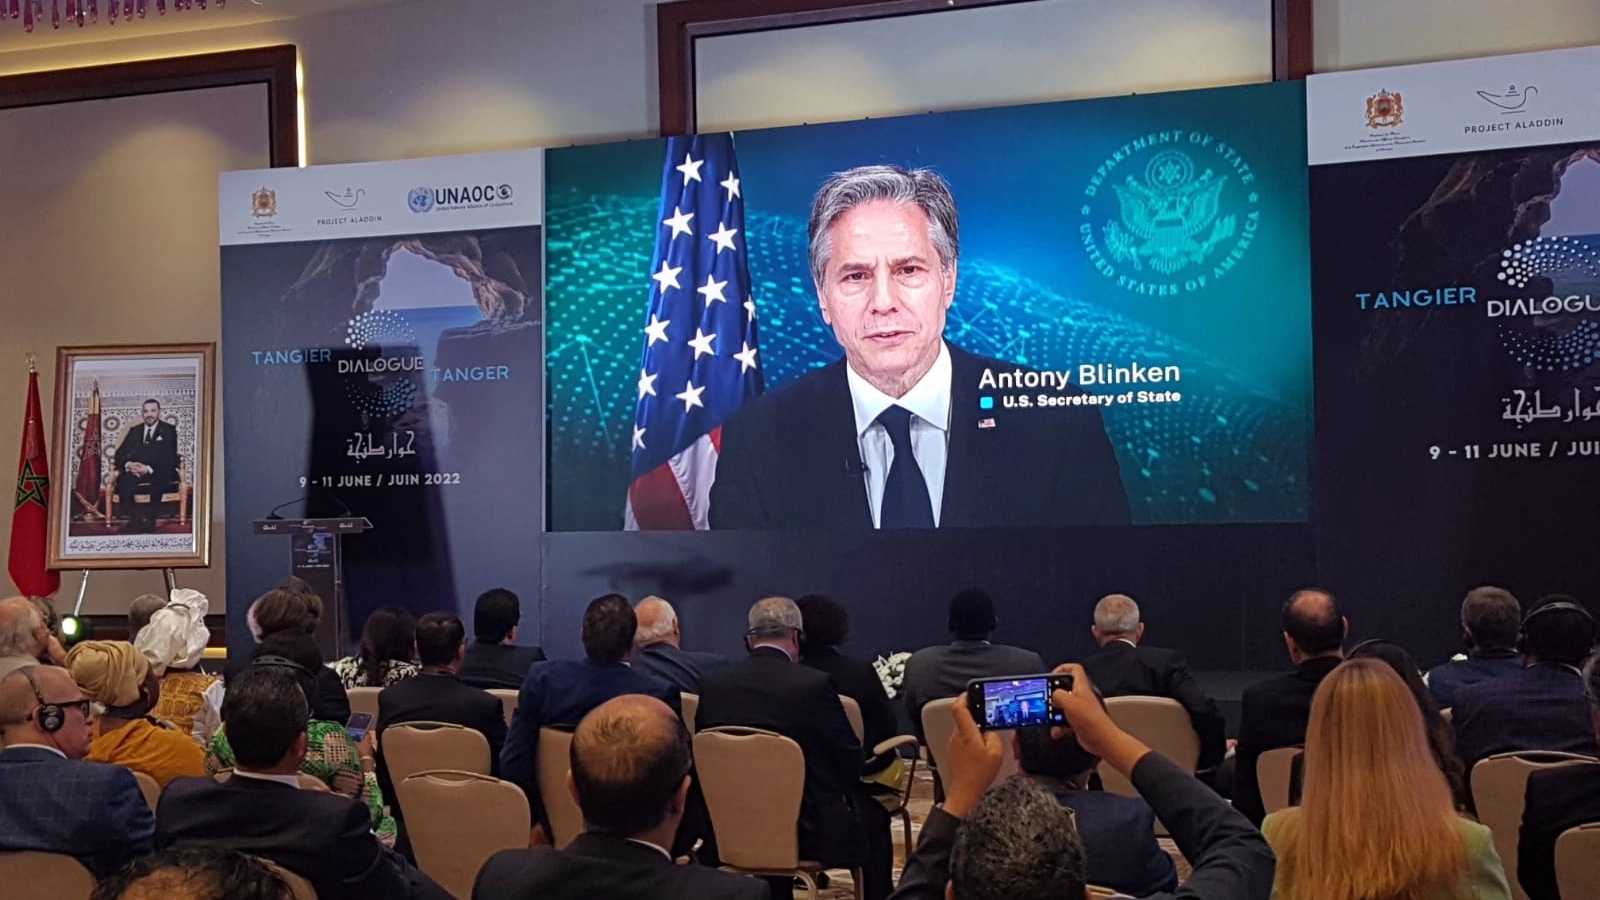 Blinken tangier conference  U.S. Secretary of State lauds Morocco and Project Aladdin efforts in building bridges between cultures, Fighting Racism, Fanaticism  - Embassy of Morocco in South Africa | Embassy of Morocco in South Africa